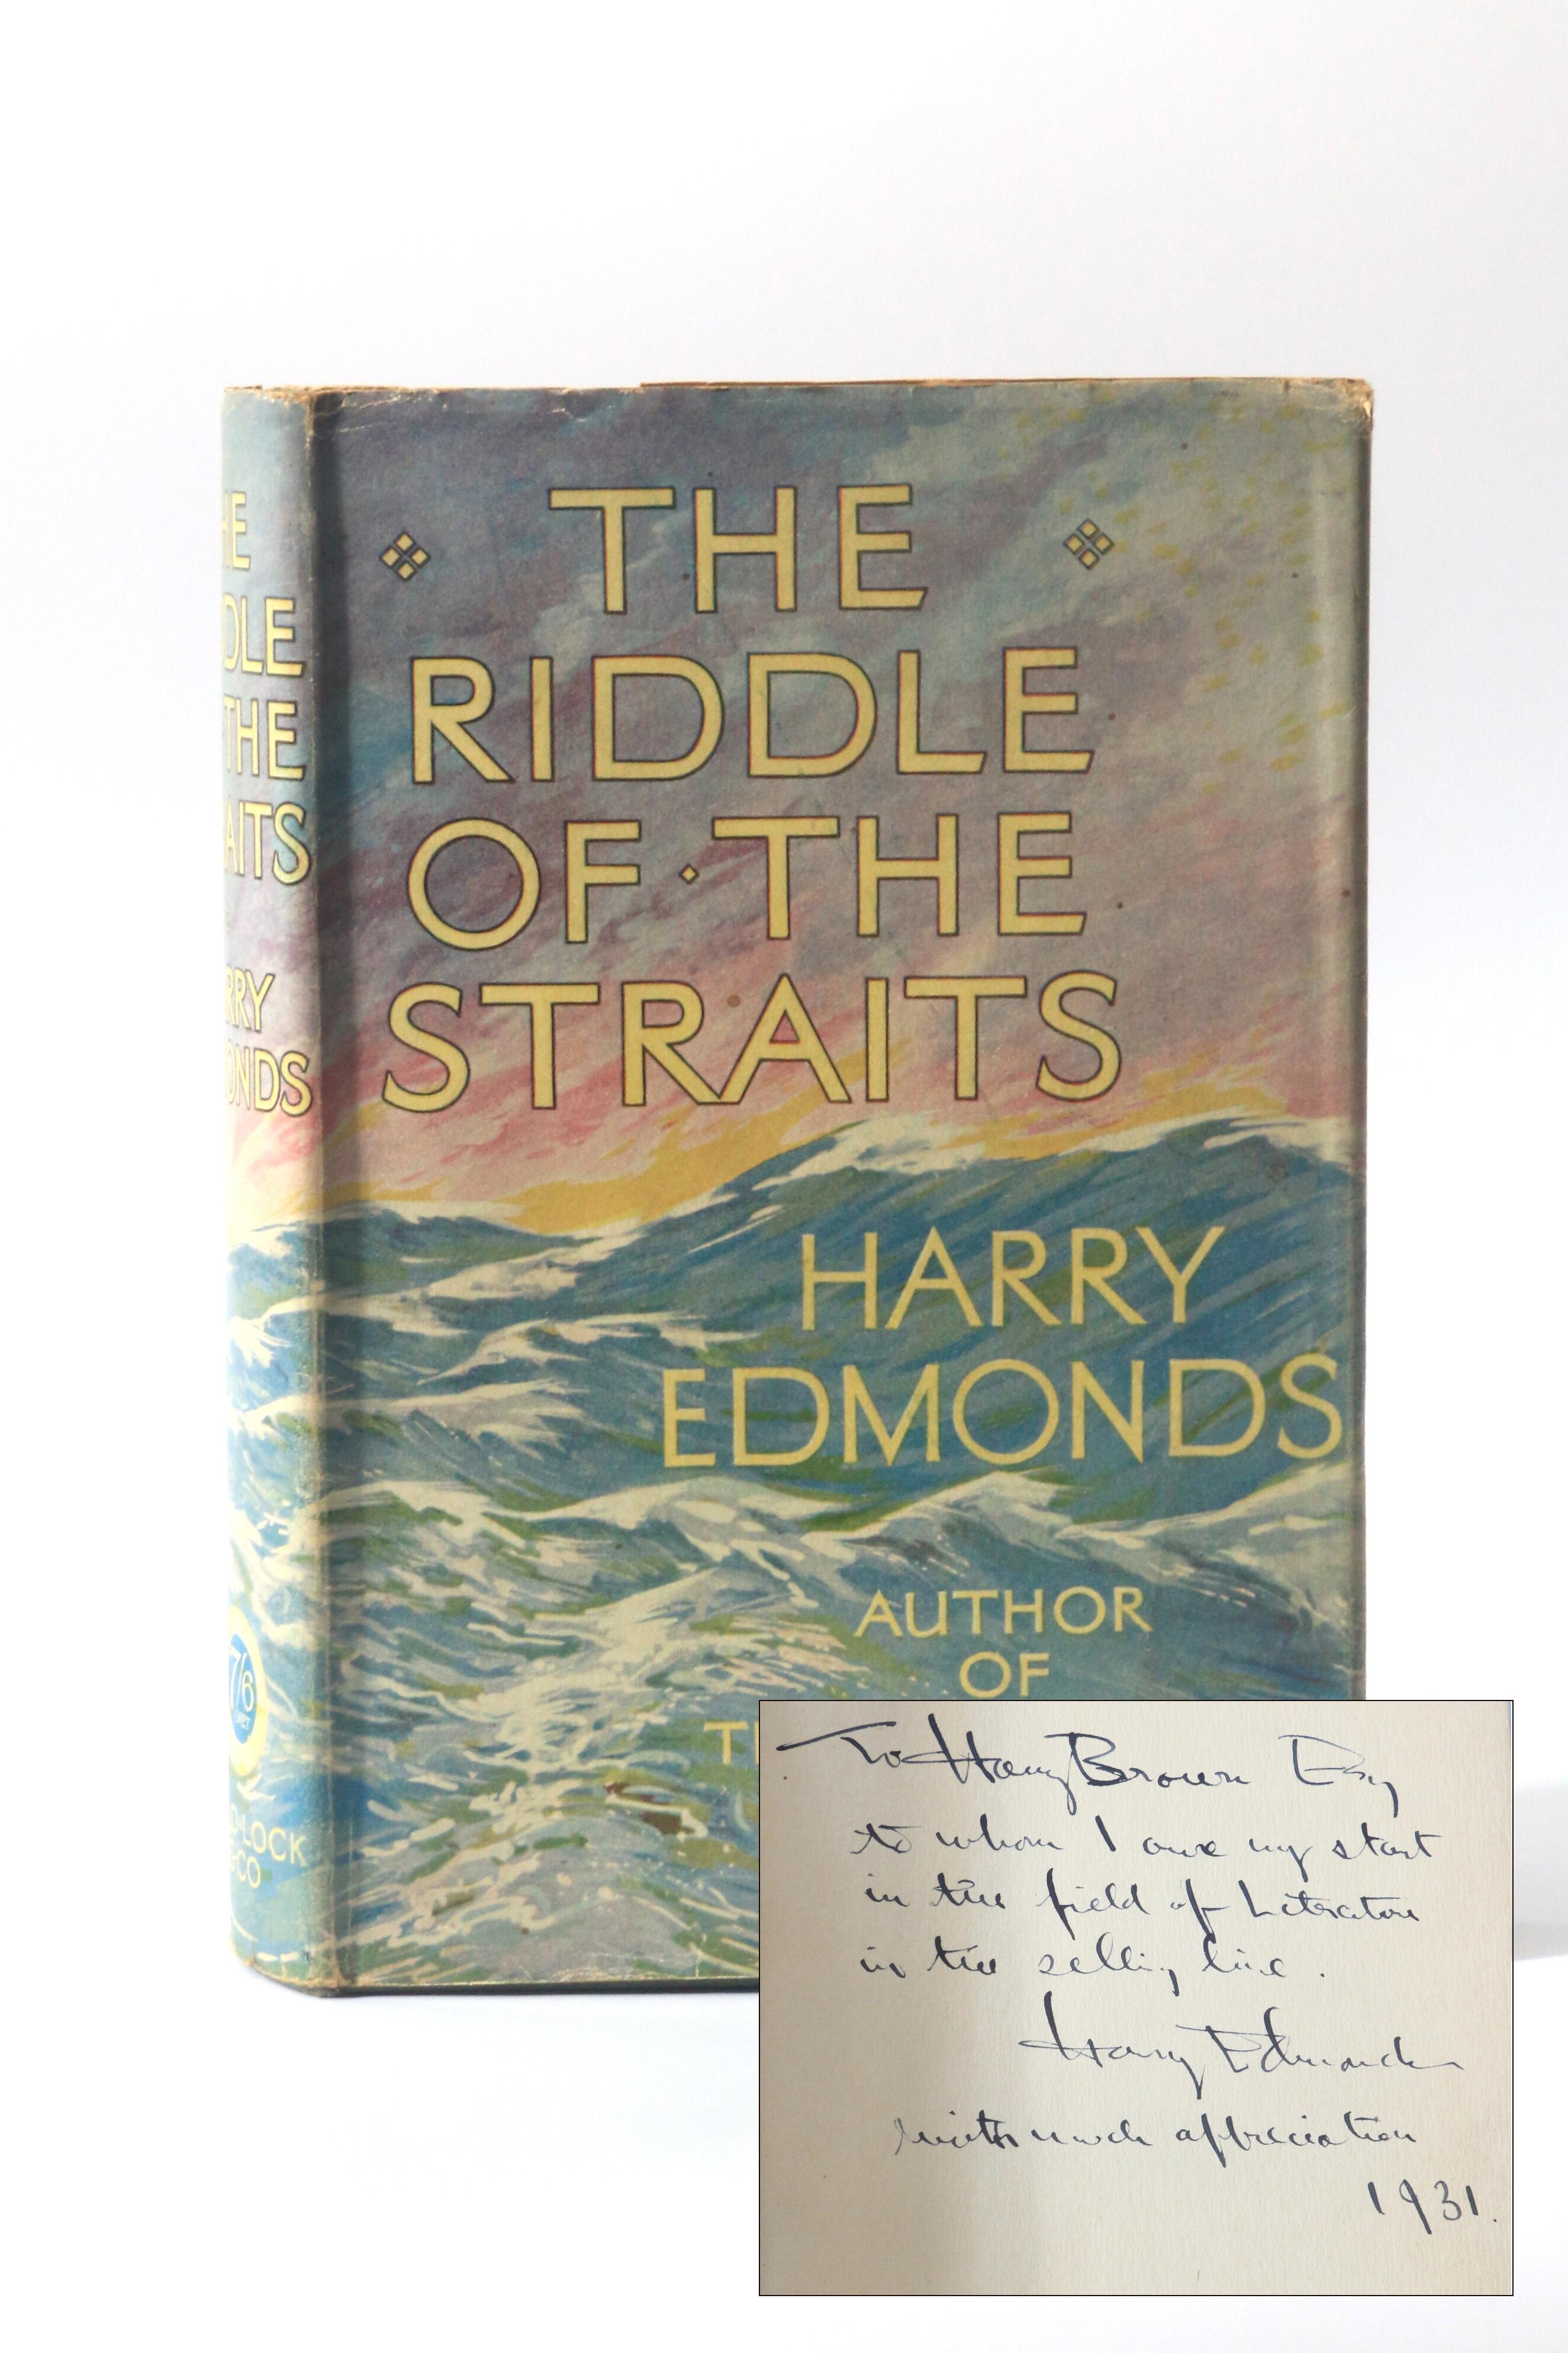 Harry Edmonds - The Riddle of the Straits - Ward, Lock & Co., 1931,Signed First Edition.